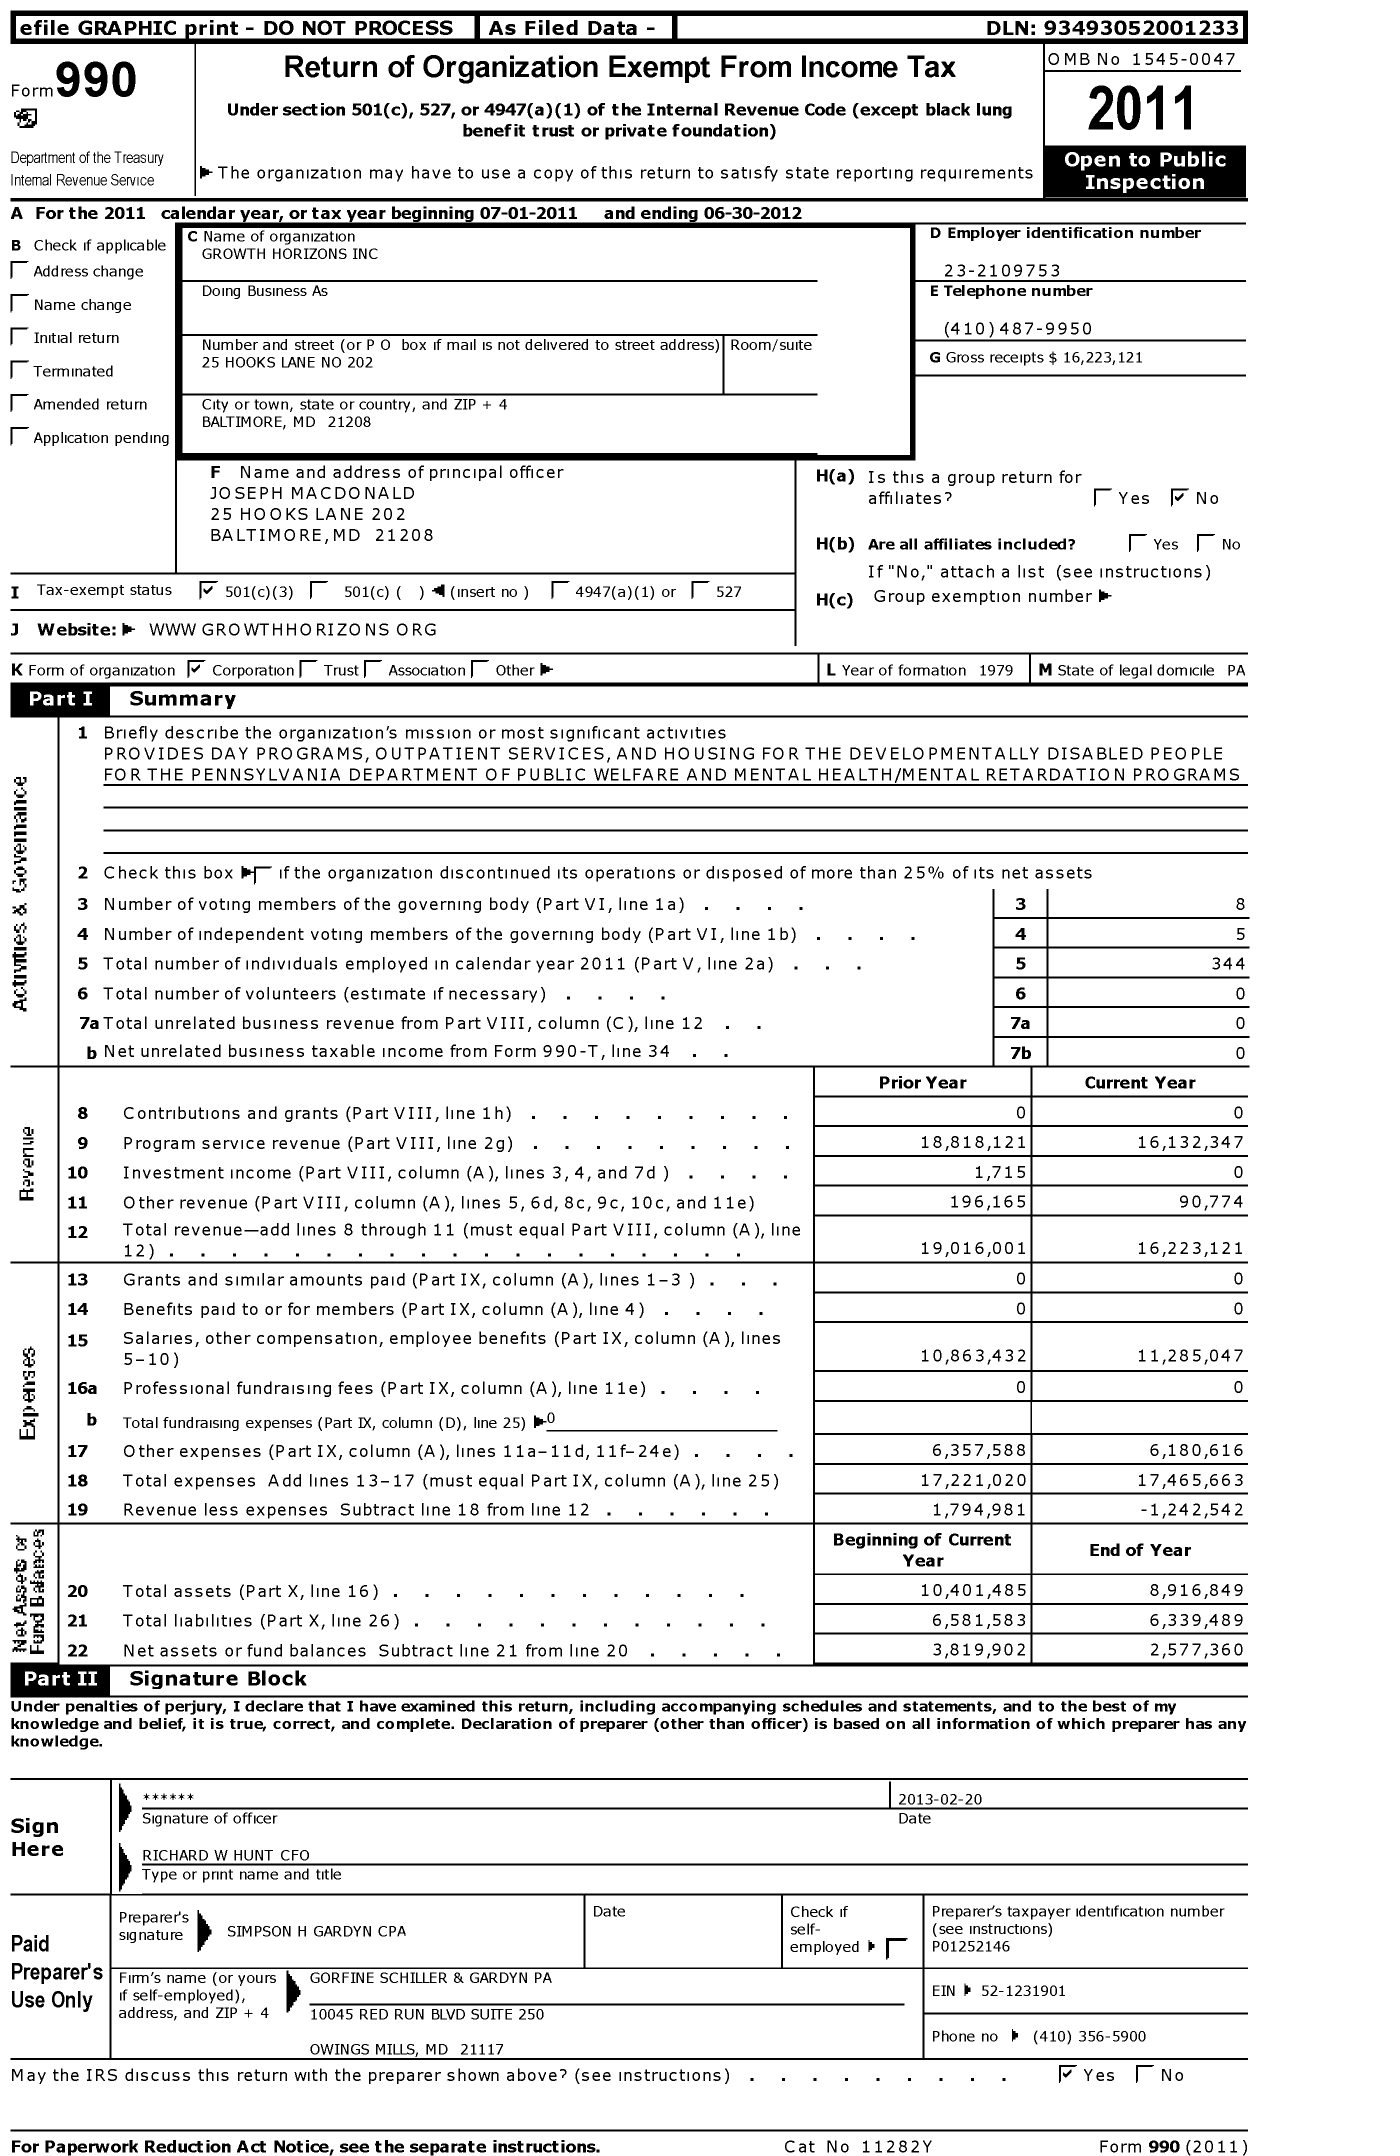 Image of first page of 2011 Form 990 for Growth Horizons